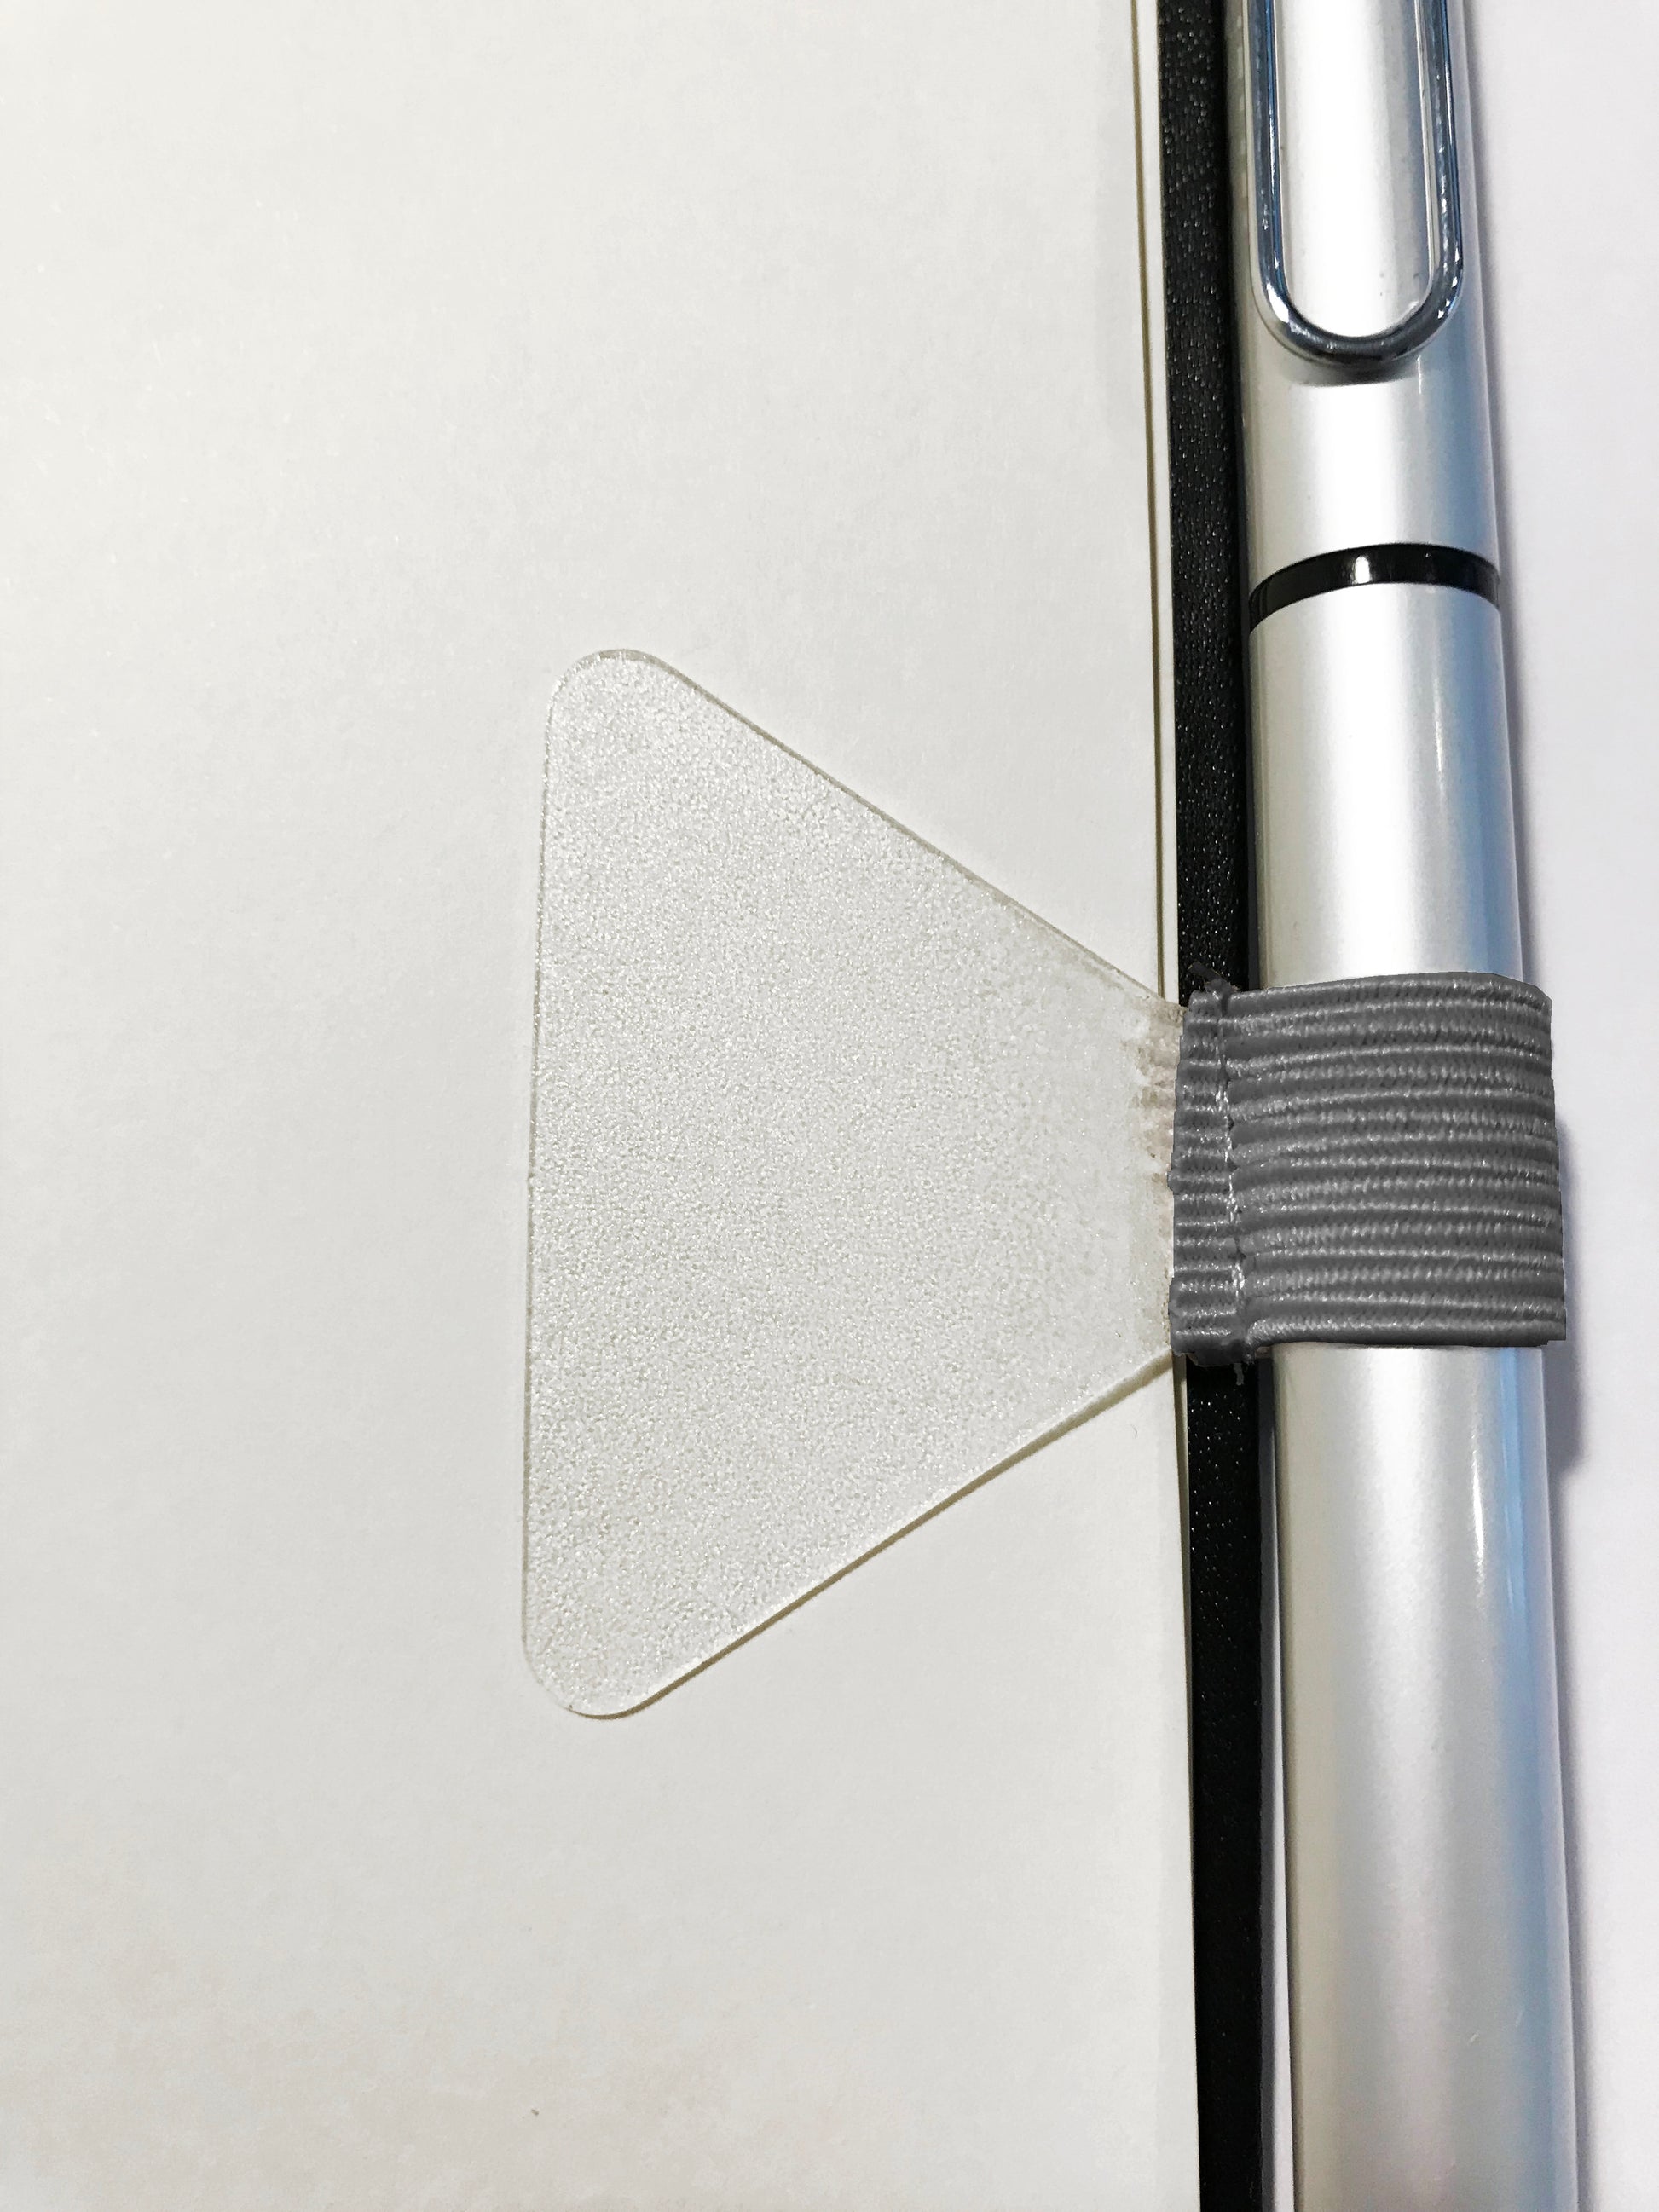 Gobrecht & Ulrich Grey Self-adhesive Pen Loop applied to notebook